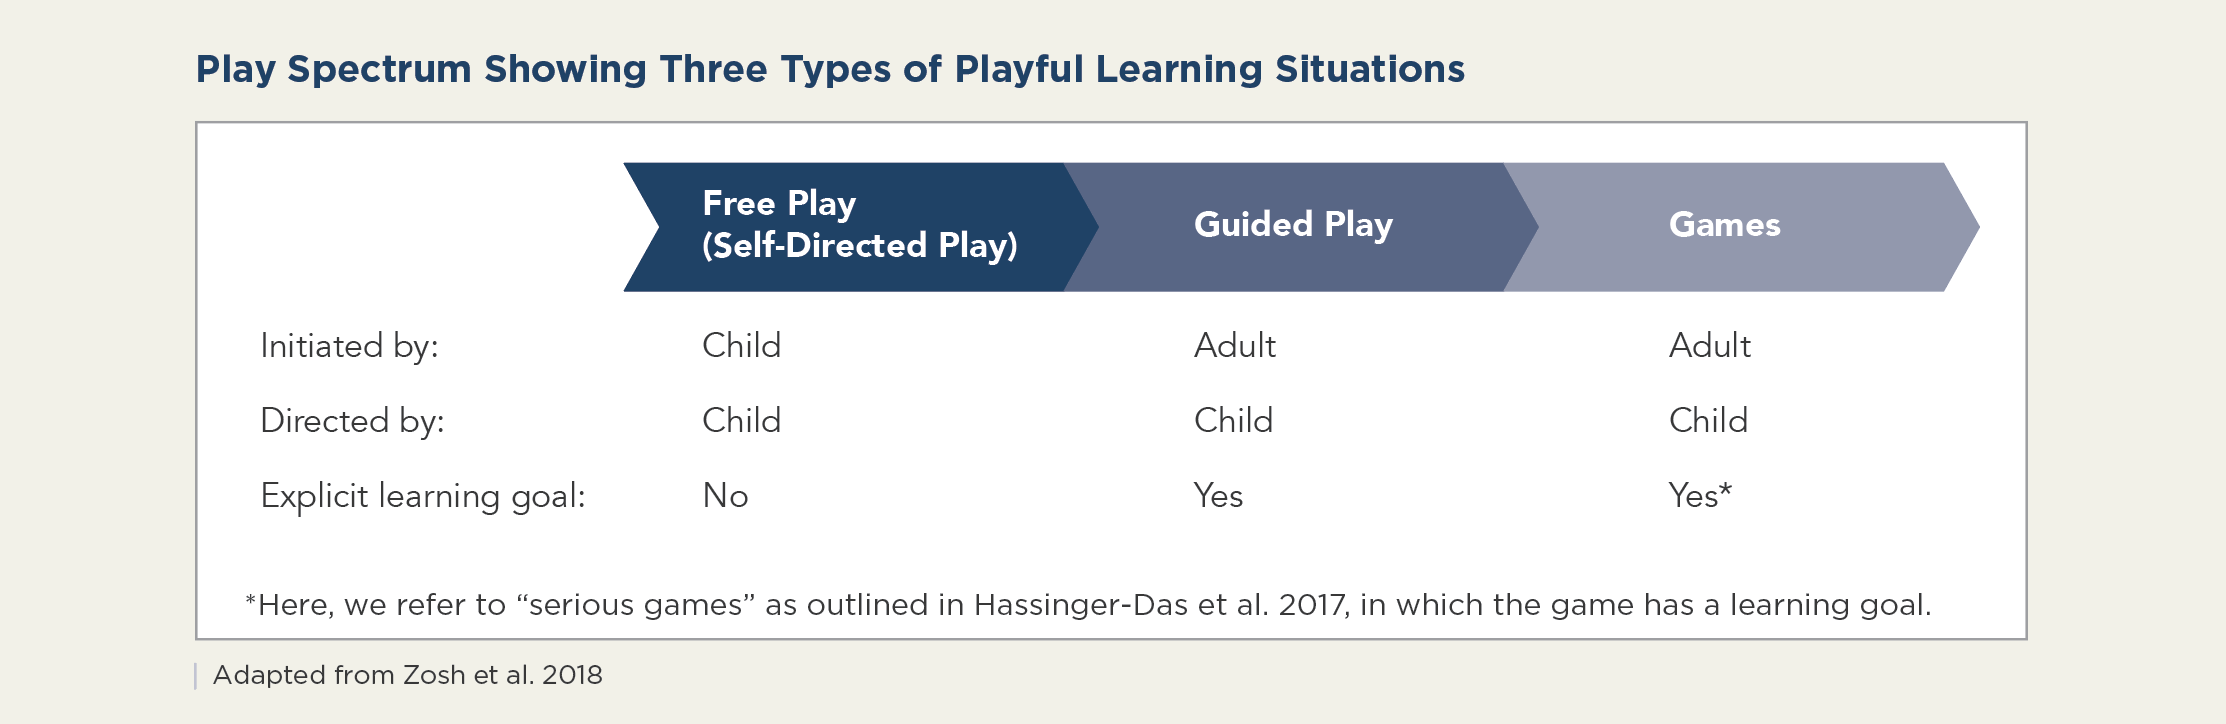 Learning Through Guided Play